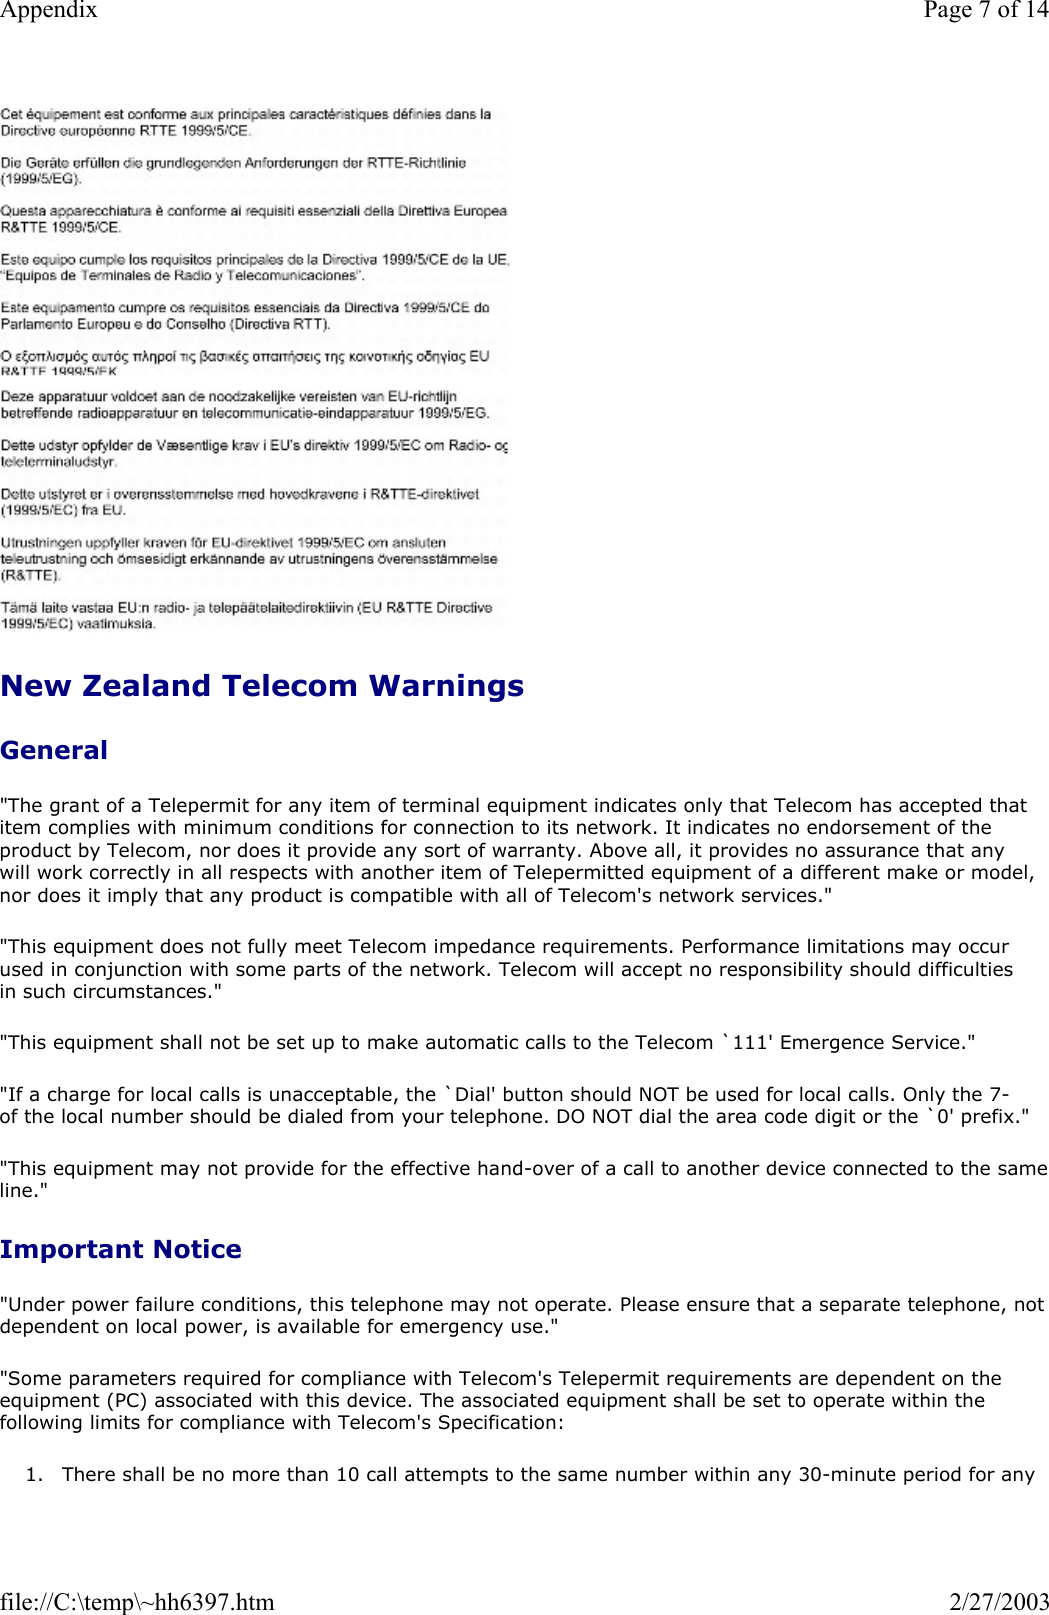   New Zealand Telecom Warnings General &quot;The grant of a Telepermit for any item of terminal equipment indicates only that Telecom has accepted that item complies with minimum conditions for connection to its network. It indicates no endorsement of the product by Telecom, nor does it provide any sort of warranty. Above all, it provides no assurance that any will work correctly in all respects with another item of Telepermitted equipment of a different make or model, nor does it imply that any product is compatible with all of Telecom&apos;s network services.&quot; &quot;This equipment does not fully meet Telecom impedance requirements. Performance limitations may occur used in conjunction with some parts of the network. Telecom will accept no responsibility should difficulties in such circumstances.&quot; &quot;This equipment shall not be set up to make automatic calls to the Telecom `111&apos; Emergence Service.&quot; &quot;If a charge for local calls is unacceptable, the `Dial&apos; button should NOT be used for local calls. Only the 7-of the local number should be dialed from your telephone. DO NOT dial the area code digit or the `0&apos; prefix.&quot; &quot;This equipment may not provide for the effective hand-over of a call to another device connected to the sameline.&quot; Important Notice &quot;Under power failure conditions, this telephone may not operate. Please ensure that a separate telephone, not dependent on local power, is available for emergency use.&quot; &quot;Some parameters required for compliance with Telecom&apos;s Telepermit requirements are dependent on the equipment (PC) associated with this device. The associated equipment shall be set to operate within the following limits for compliance with Telecom&apos;s Specification: 1. There shall be no more than 10 call attempts to the same number within any 30-minute period for any Page 7 of 14Appendix2/27/2003file://C:\temp\~hh6397.htm